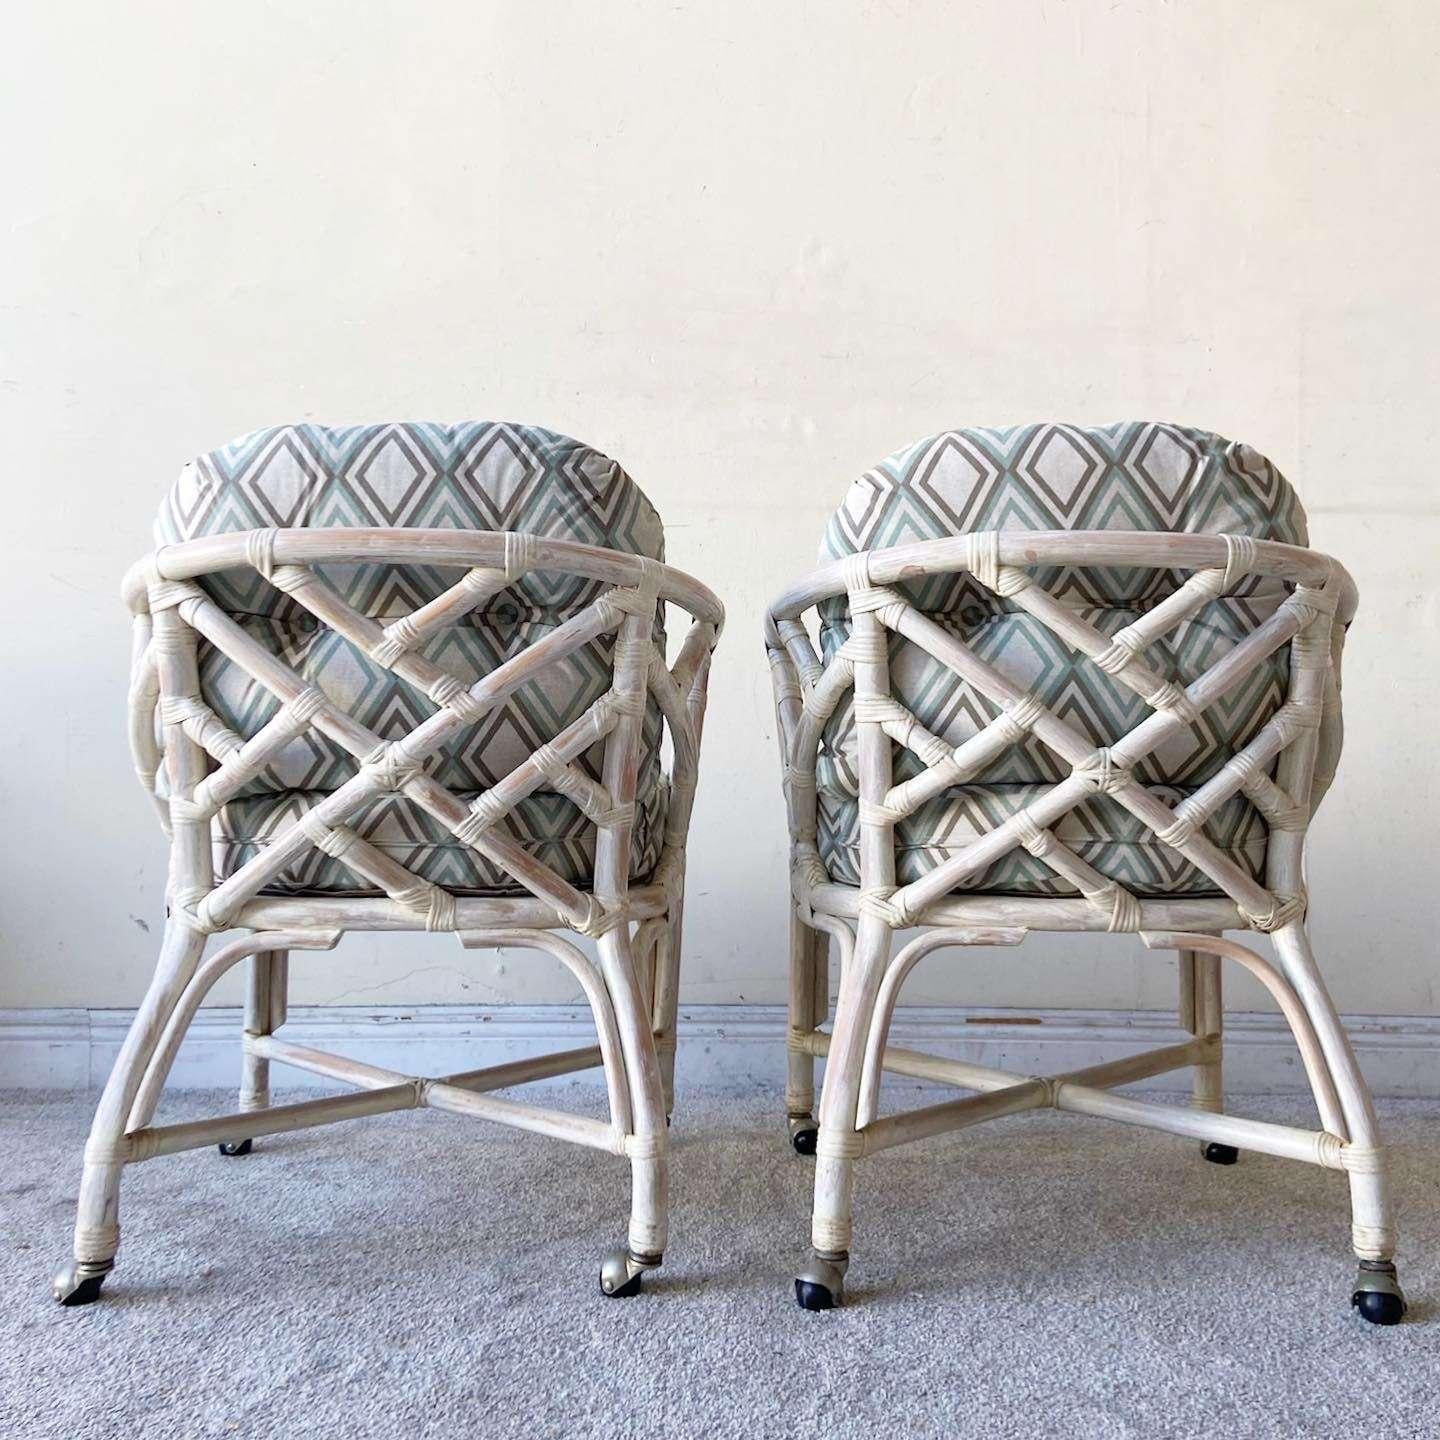 Vintage Boho Chic Bamboo Rattan Chippendale Dining Chairs by Henry Link In Good Condition For Sale In Delray Beach, FL